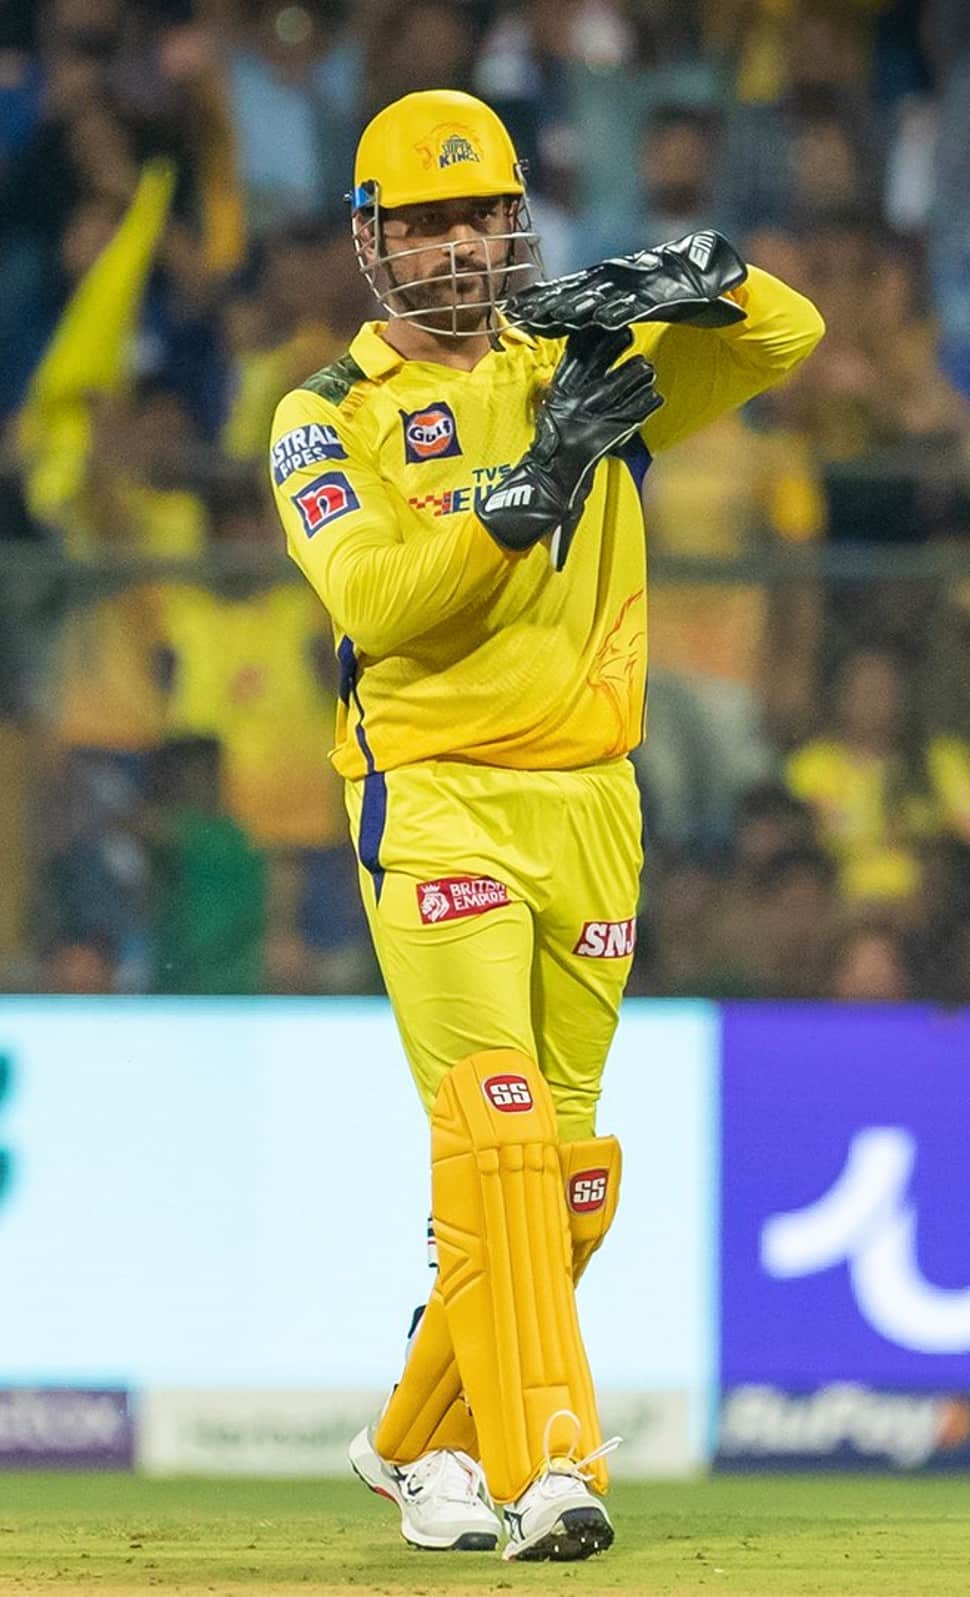 CSK skipper MS Dhoni became only the 5th Indian batter to score 5,000 runs in IPL. Dhoni currently has 5,004 runs from 237 matches. (Source: Twitter)